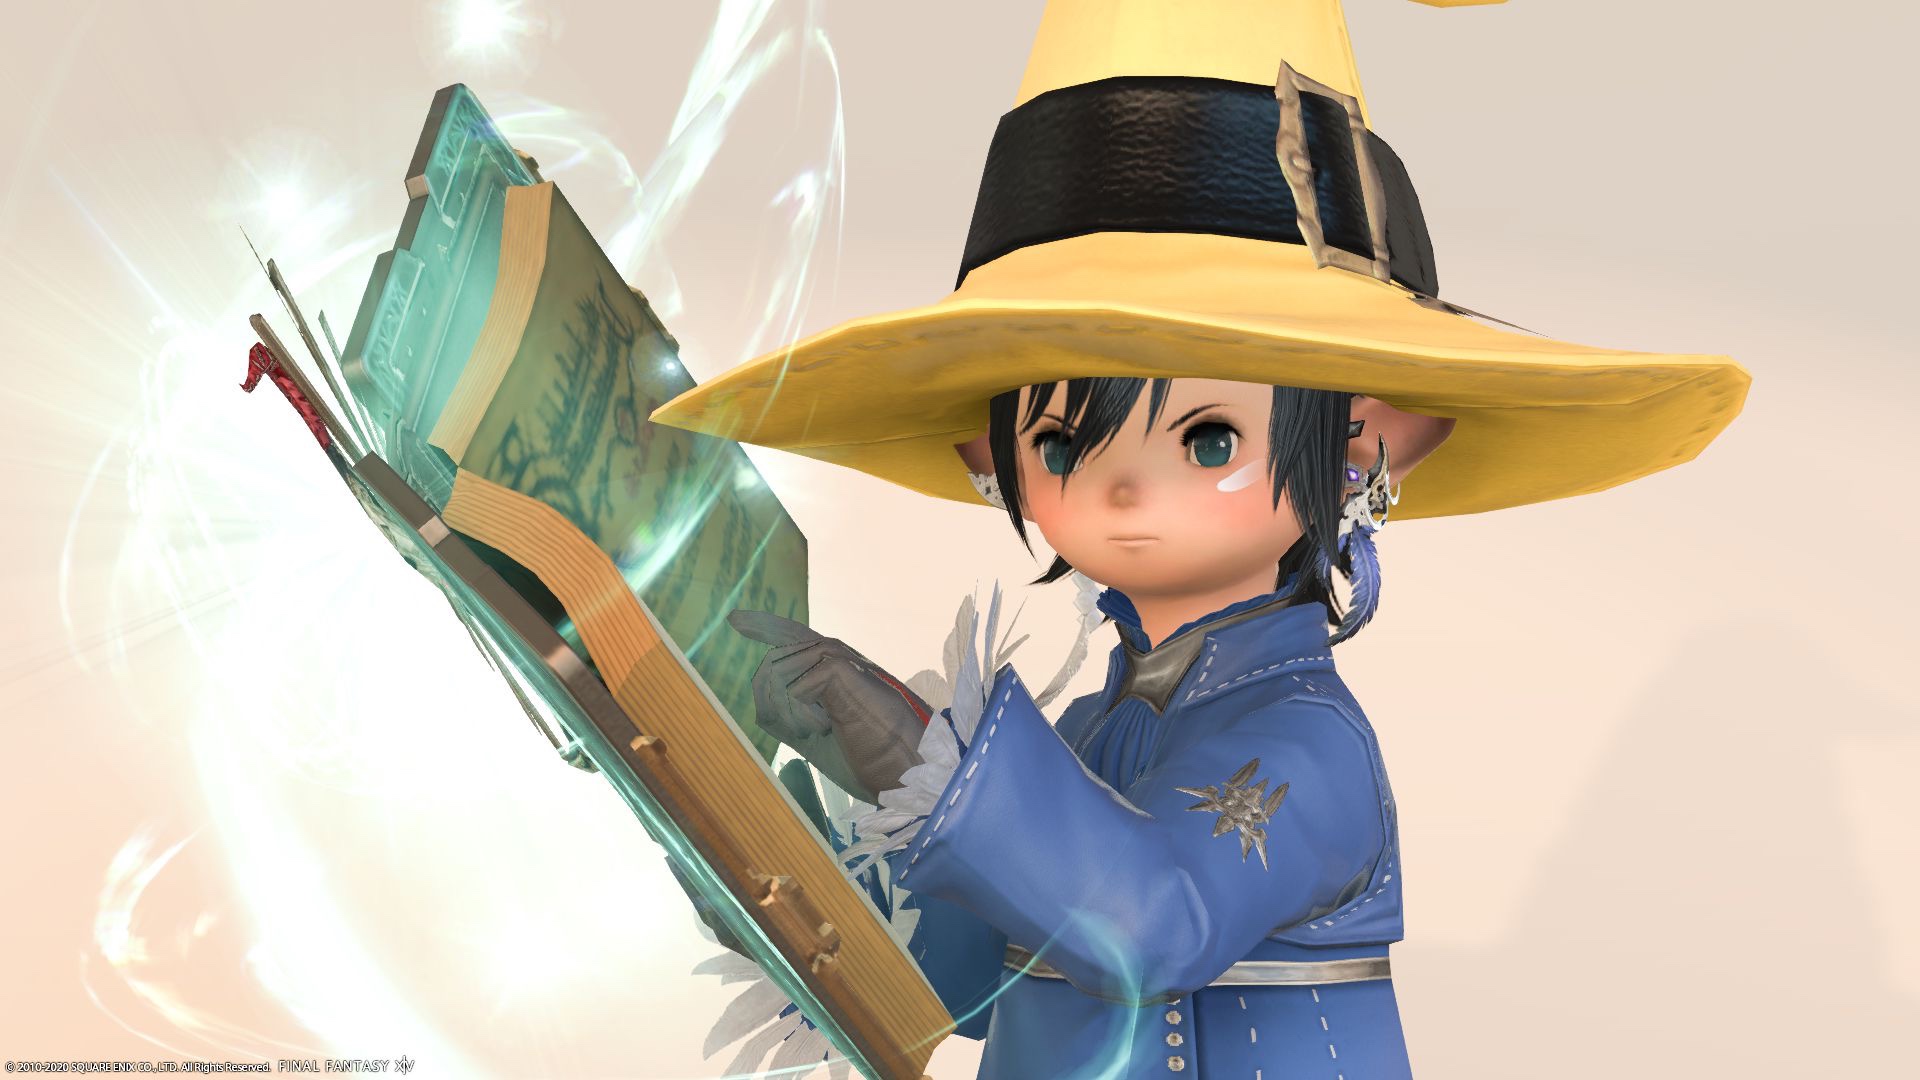 Glamour I Longed For The Vivi Of Ff9 And Tried To Imitate The Color Coordination Ff14ブログ Norirow Note エオルゼア戦記